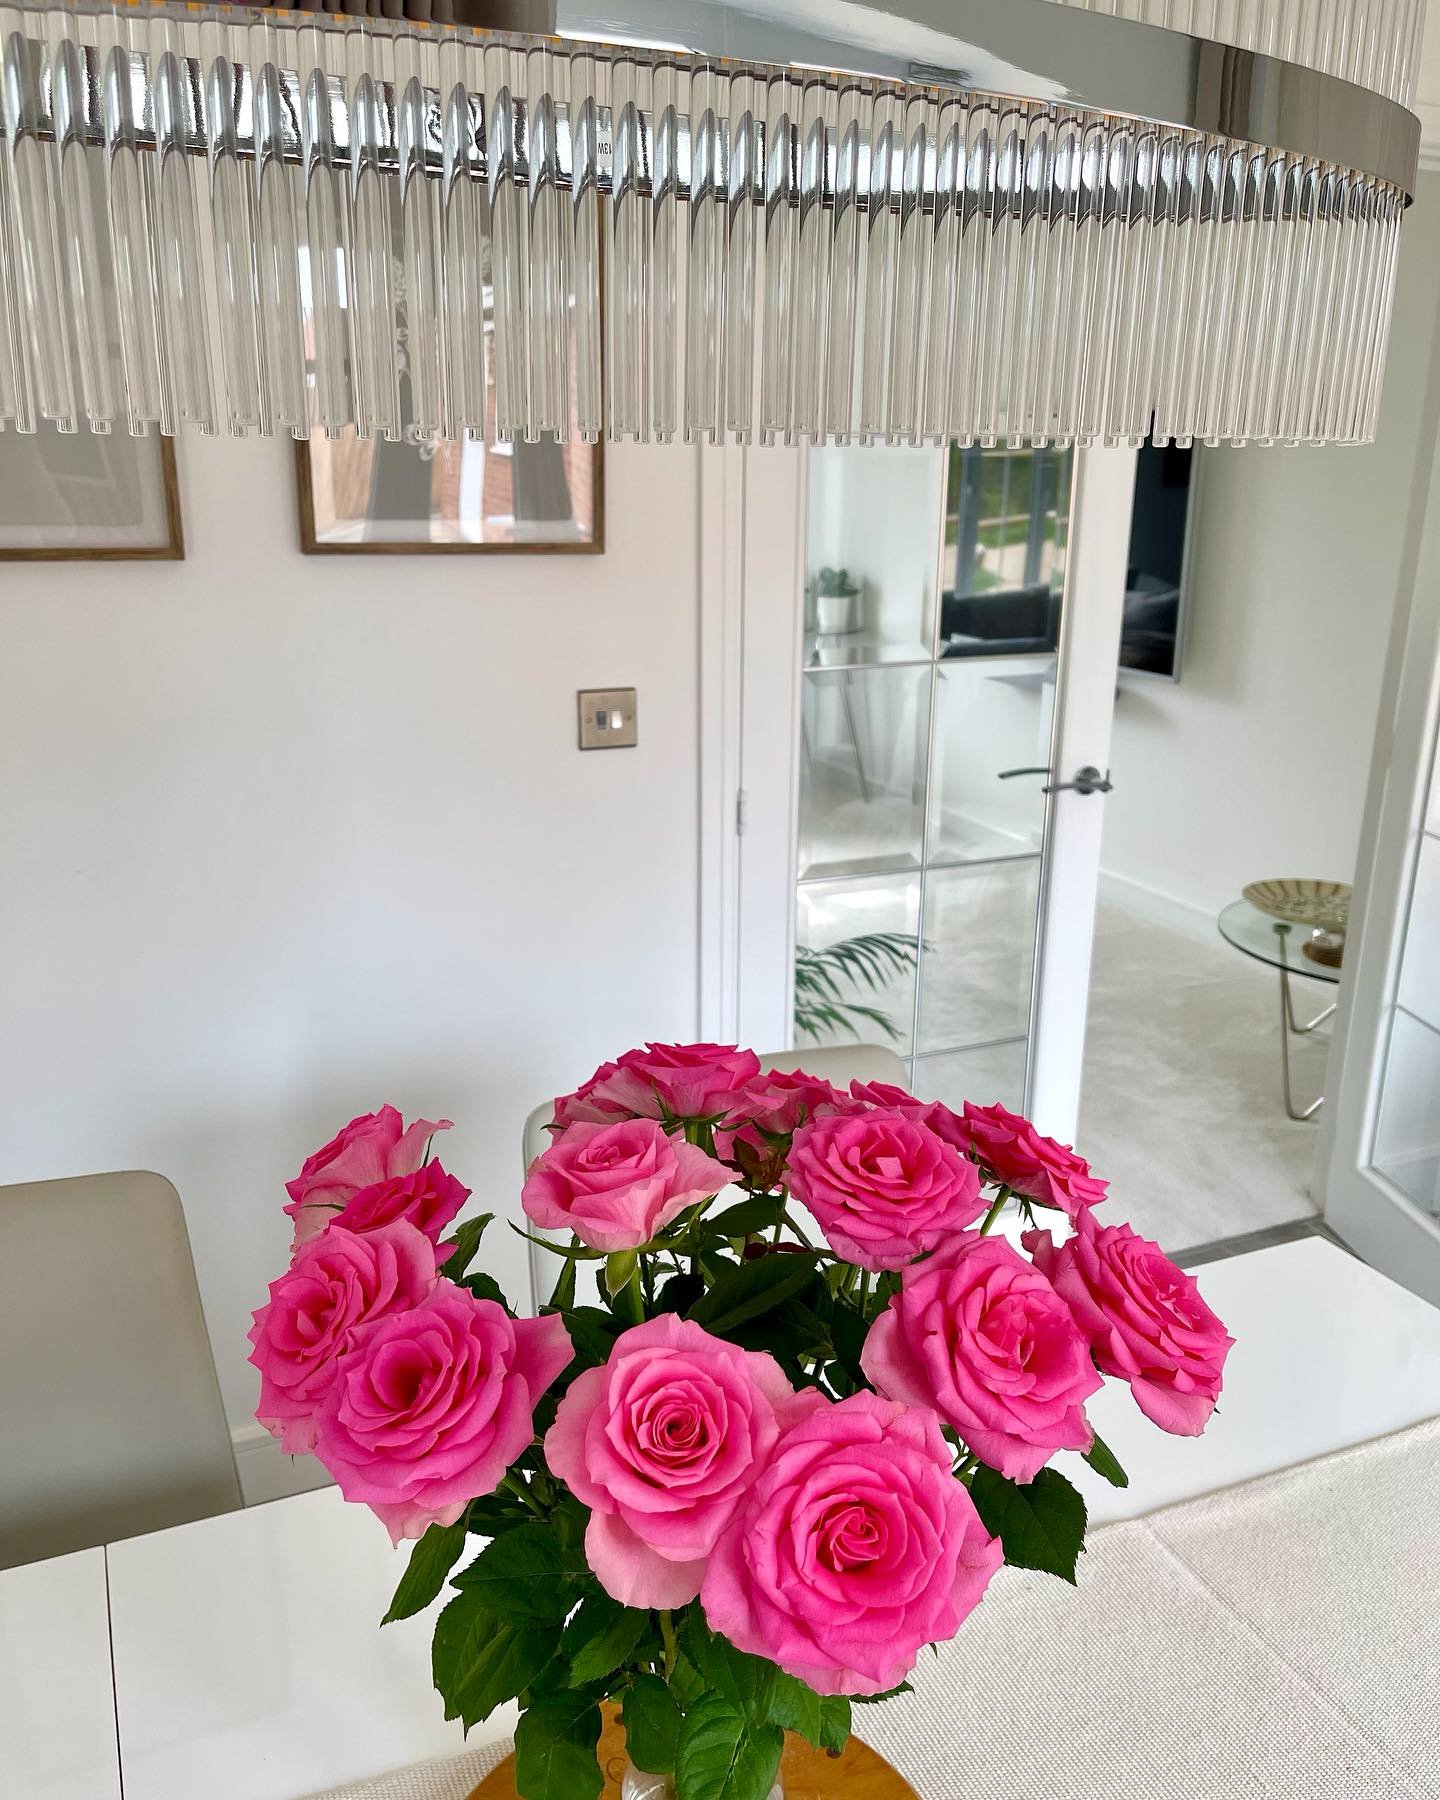 Another absolutely beautiful bouquet of pink roses; I&rsquo;m not sure who is supplying our local @waitrose at the moment but their roses are amazing, my last bunch lasted over 2 weeks!! Shame I can&rsquo;t find any artificial flowers that compare to